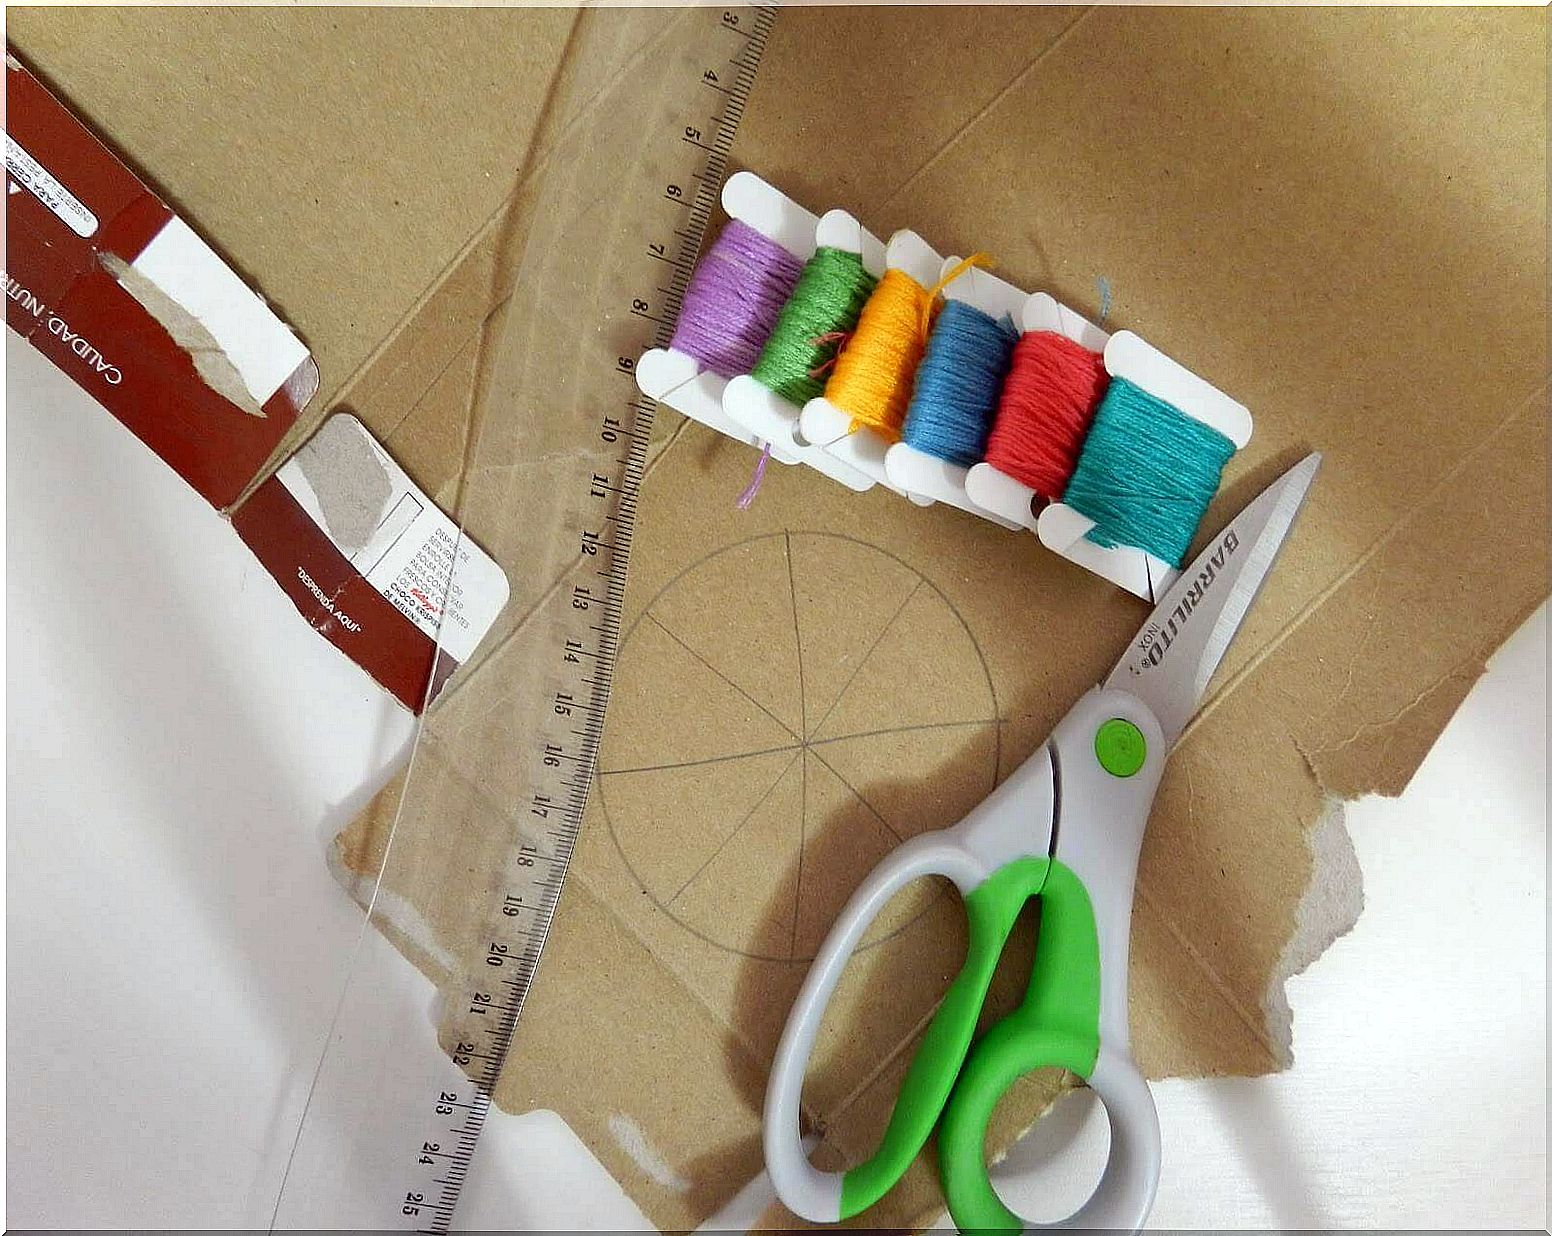 Cardboard and scissors for unusual bedside table designs